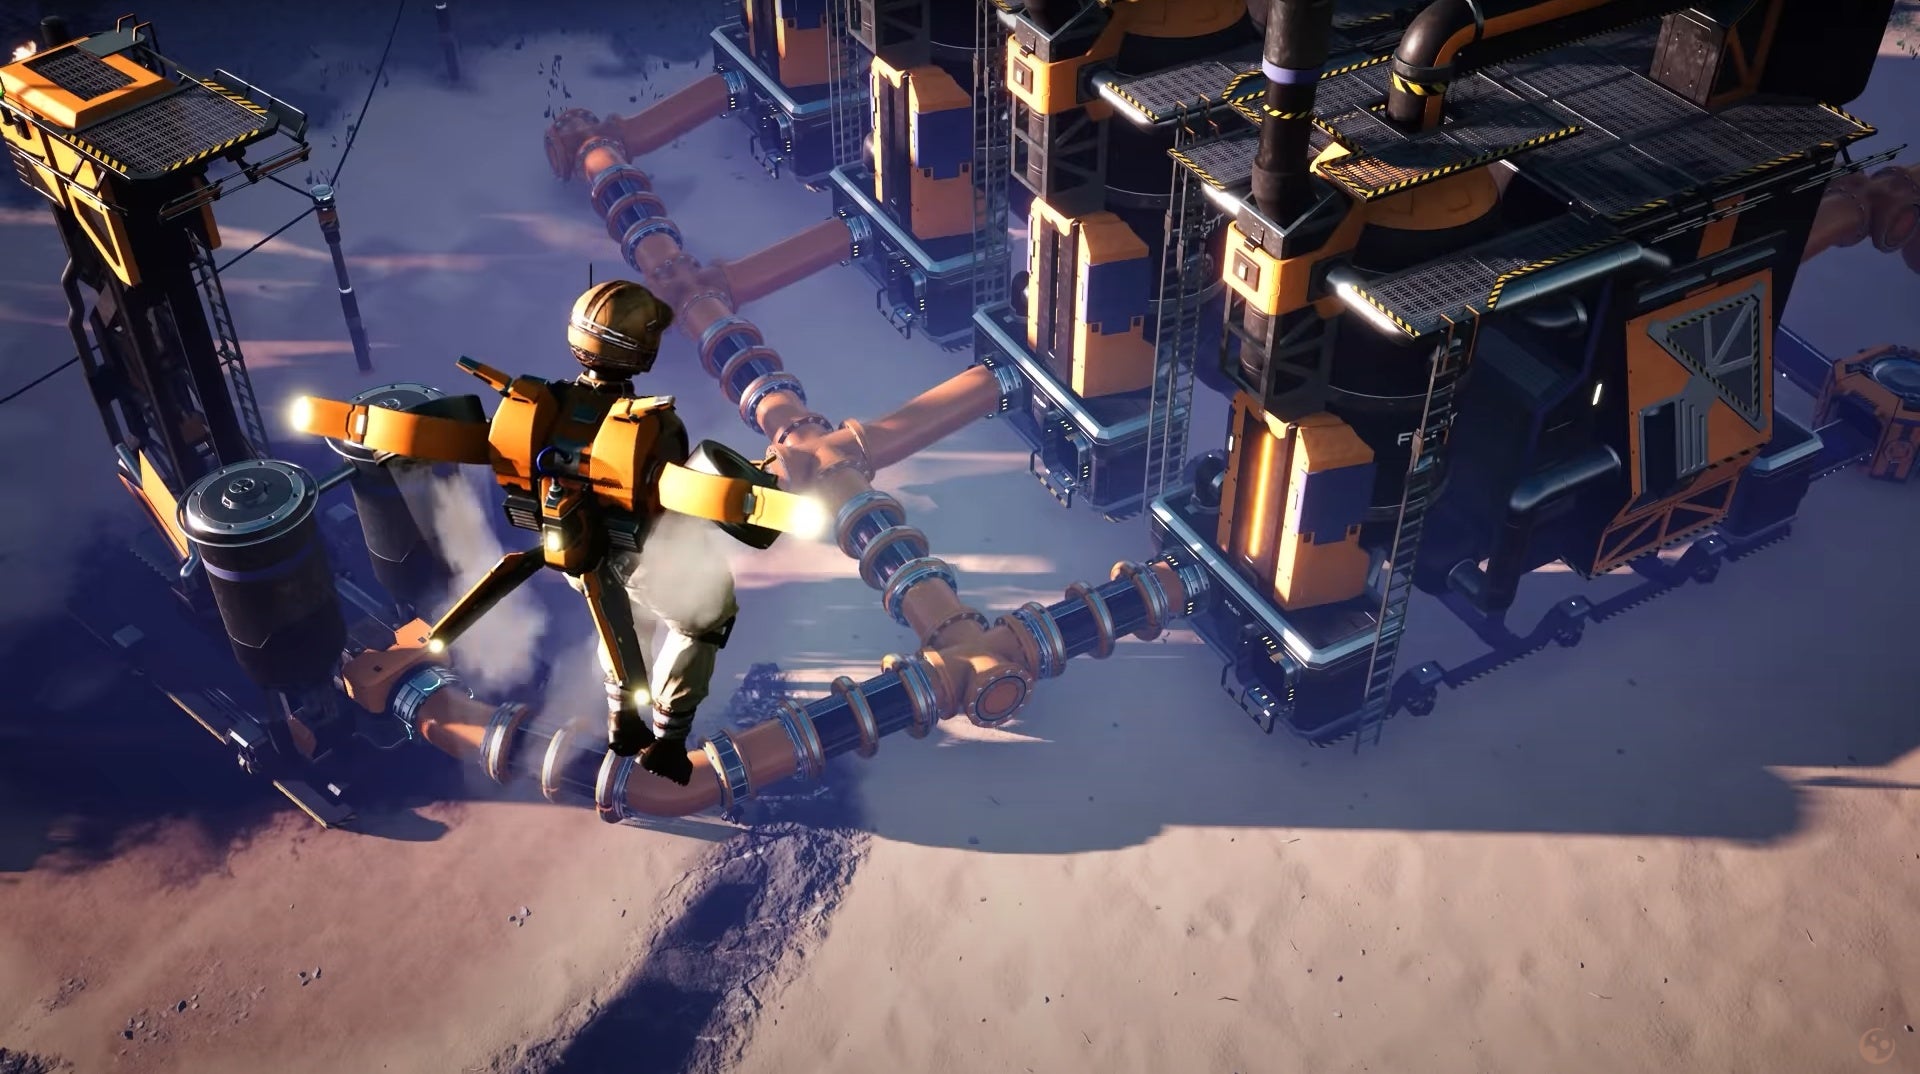 Satisfactory’s big update 4 is available now, adds hoverpacks, drones and more